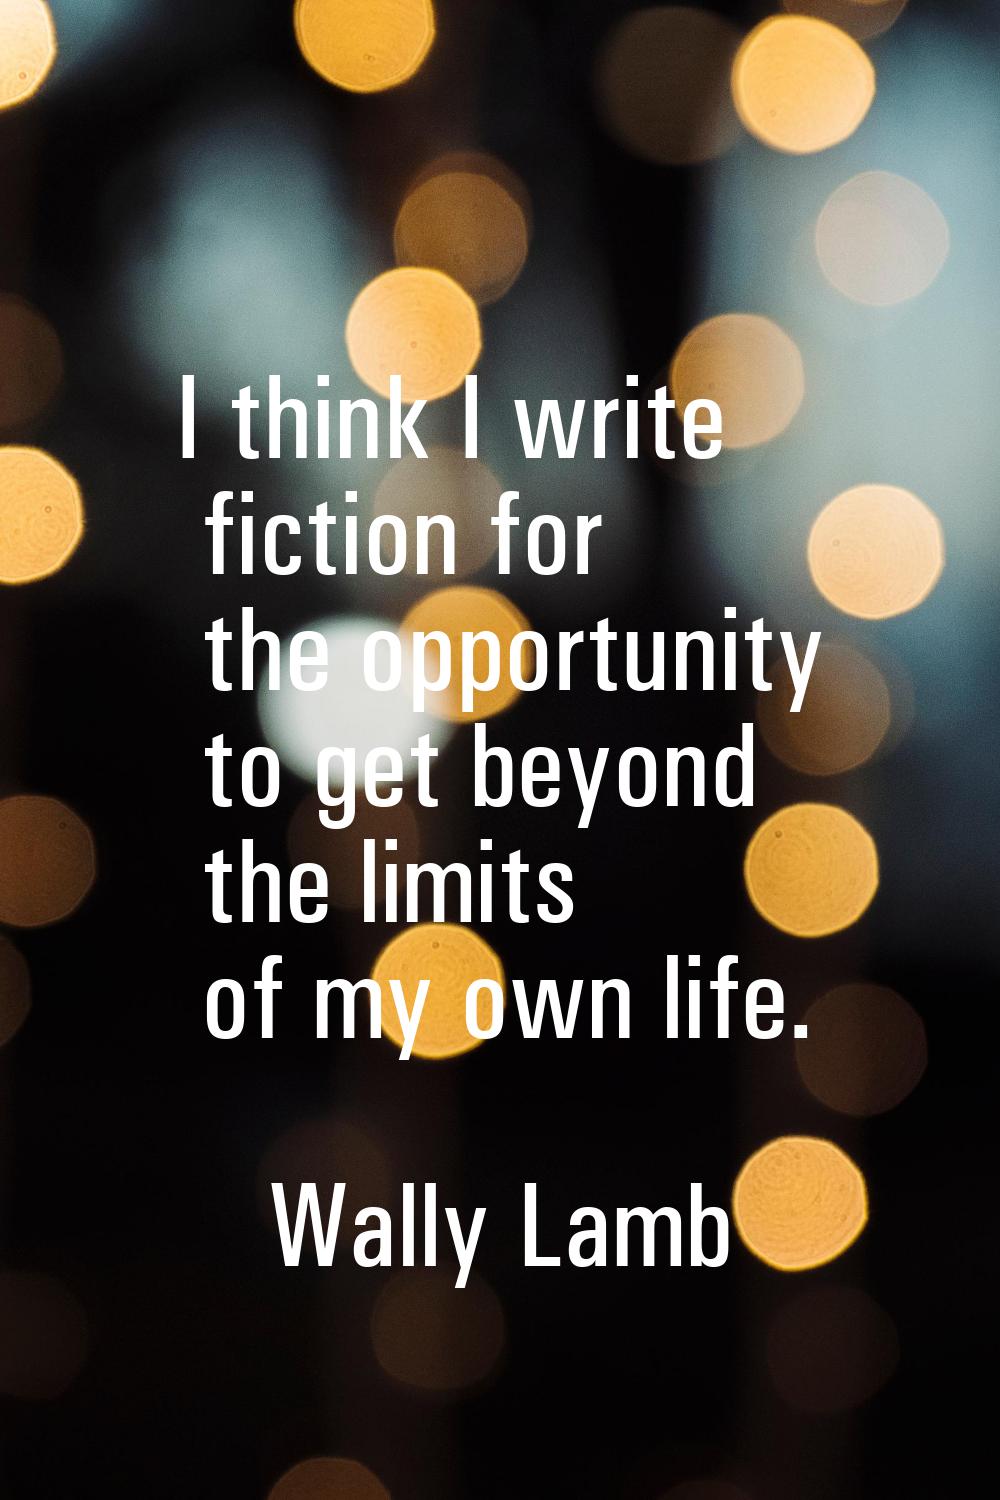 I think I write fiction for the opportunity to get beyond the limits of my own life.